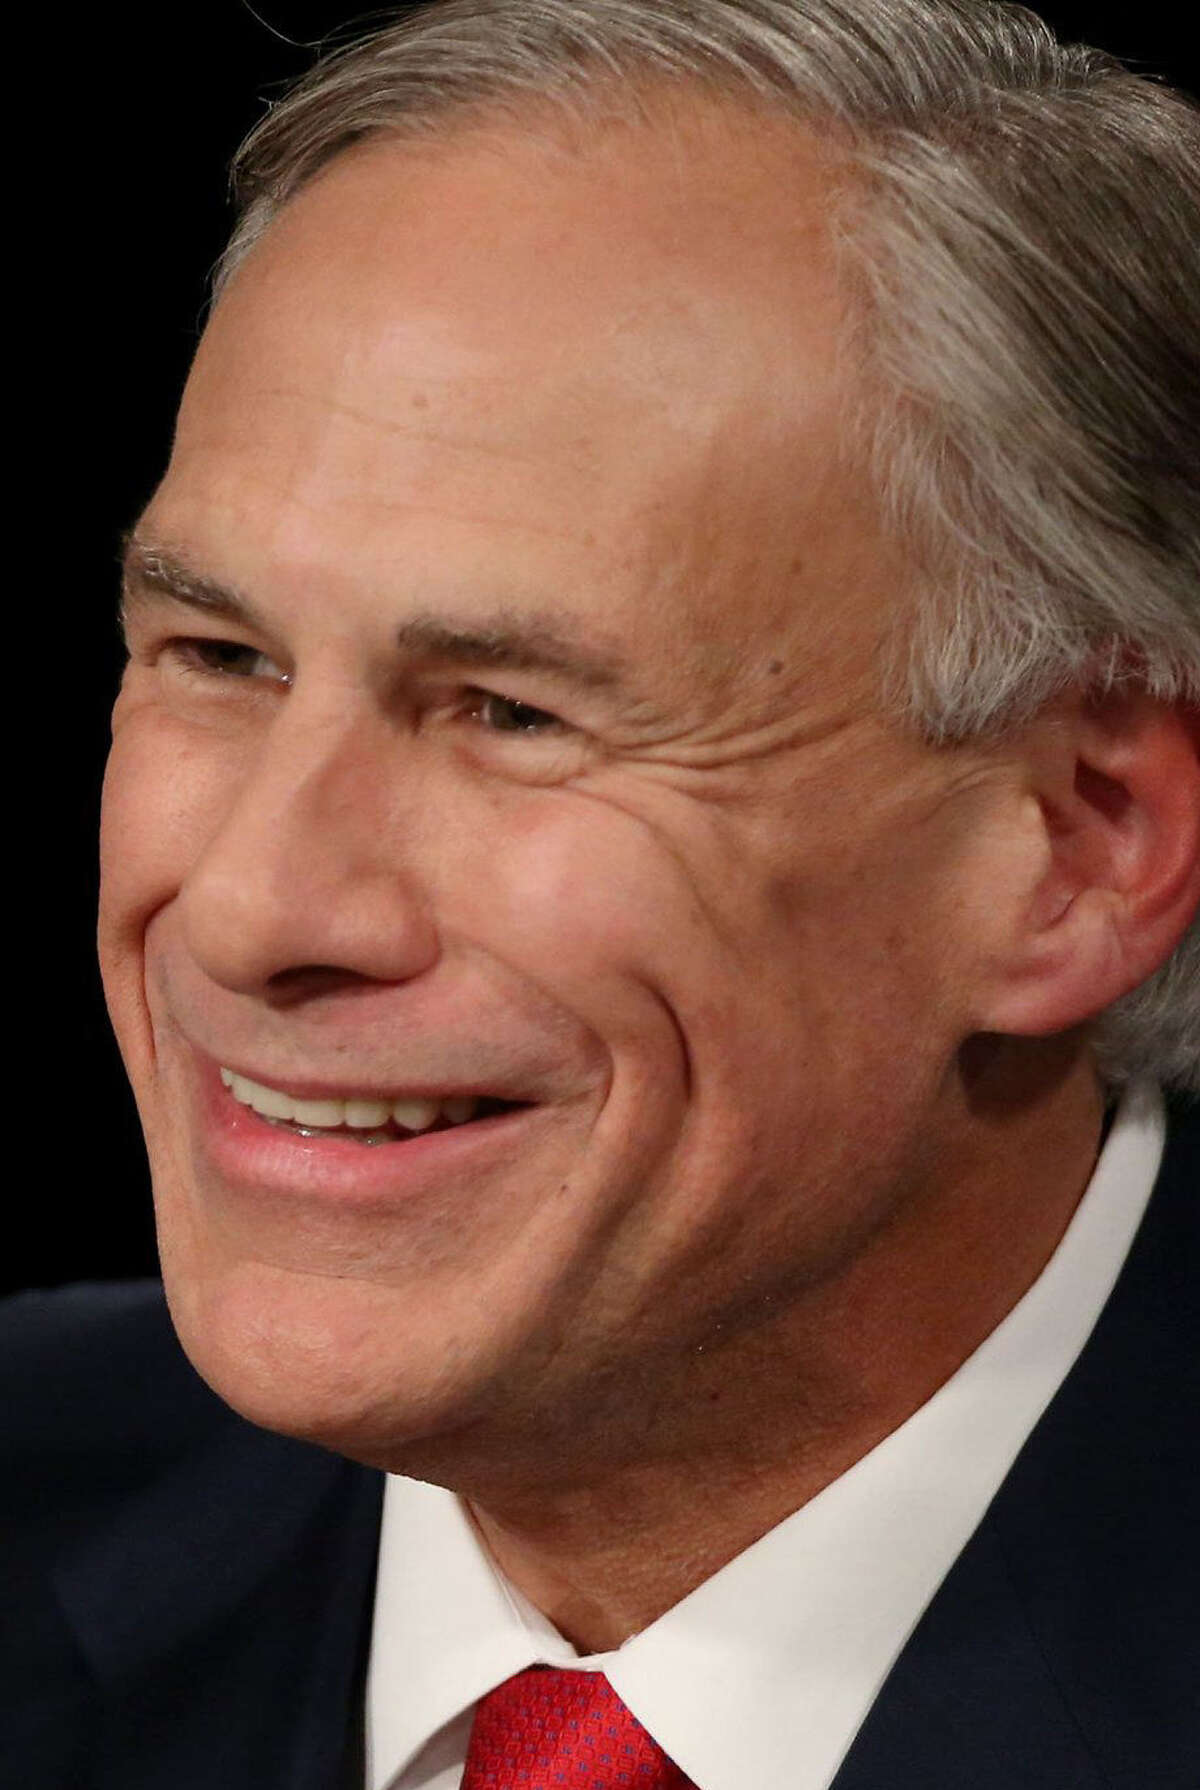 Gubernator-ial candidate Greg Abbott is said to have more than $30 million for campaign.